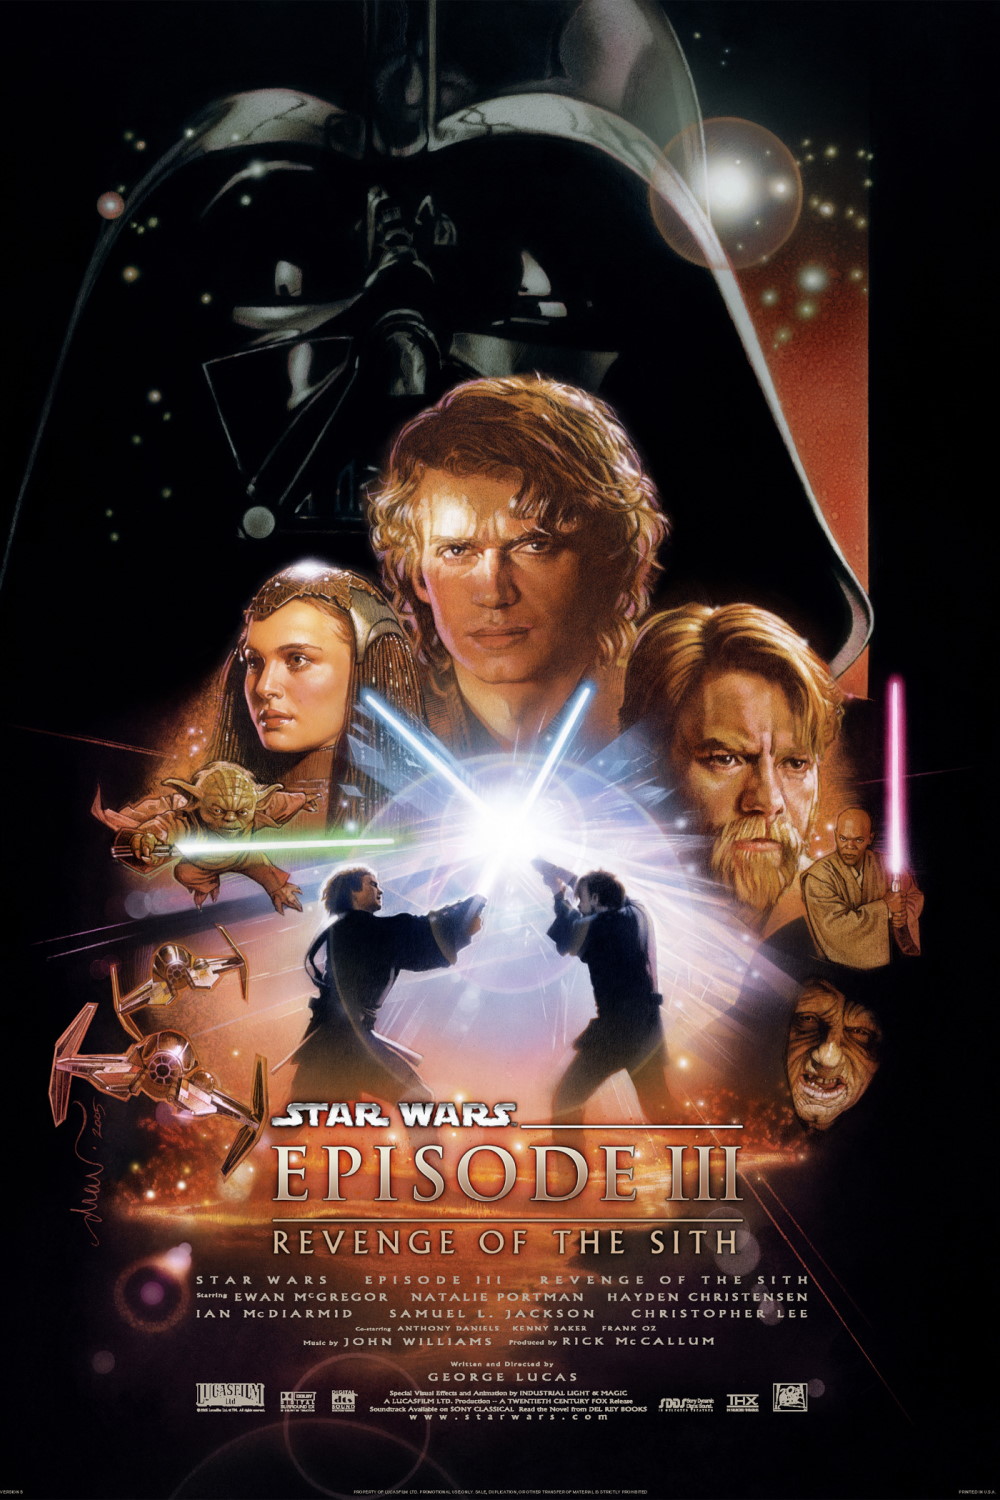 Star Wars: Episode III – Revenge of the Sith (2005) Poster